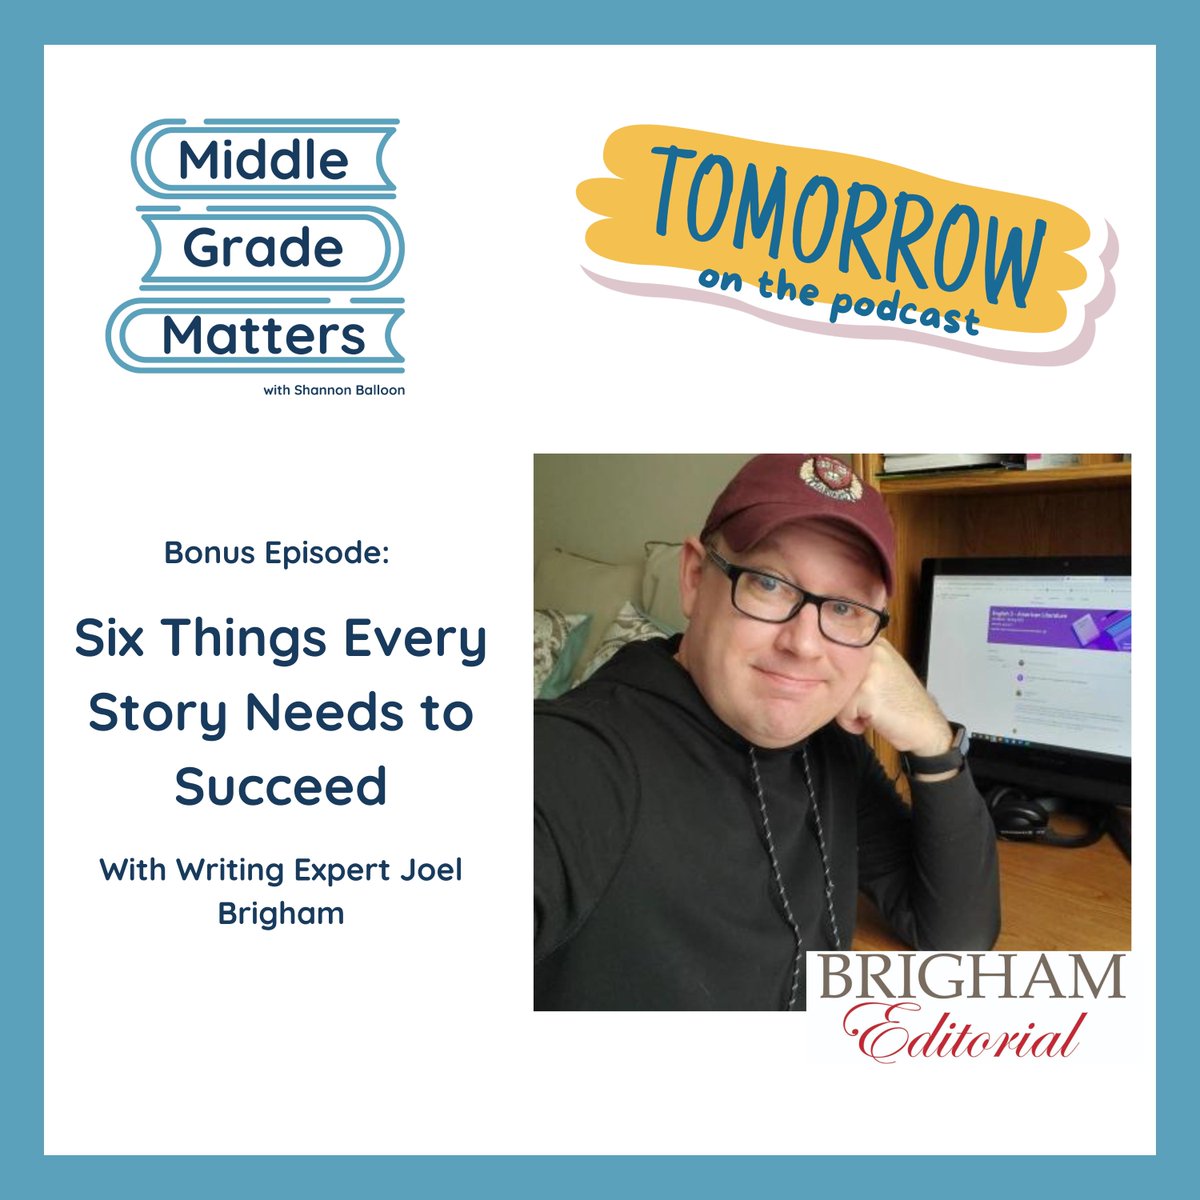 Tomorrow on the Middle Grade Matters podcast - a bonus episode on craft with writing expert Joel Brigham of Brigham Editorial. Joel walks us through six things every story needs to succeed. Grab a pen and paper and follow the podcast here: tr.ee/lEpfe469CR @joelbrigham